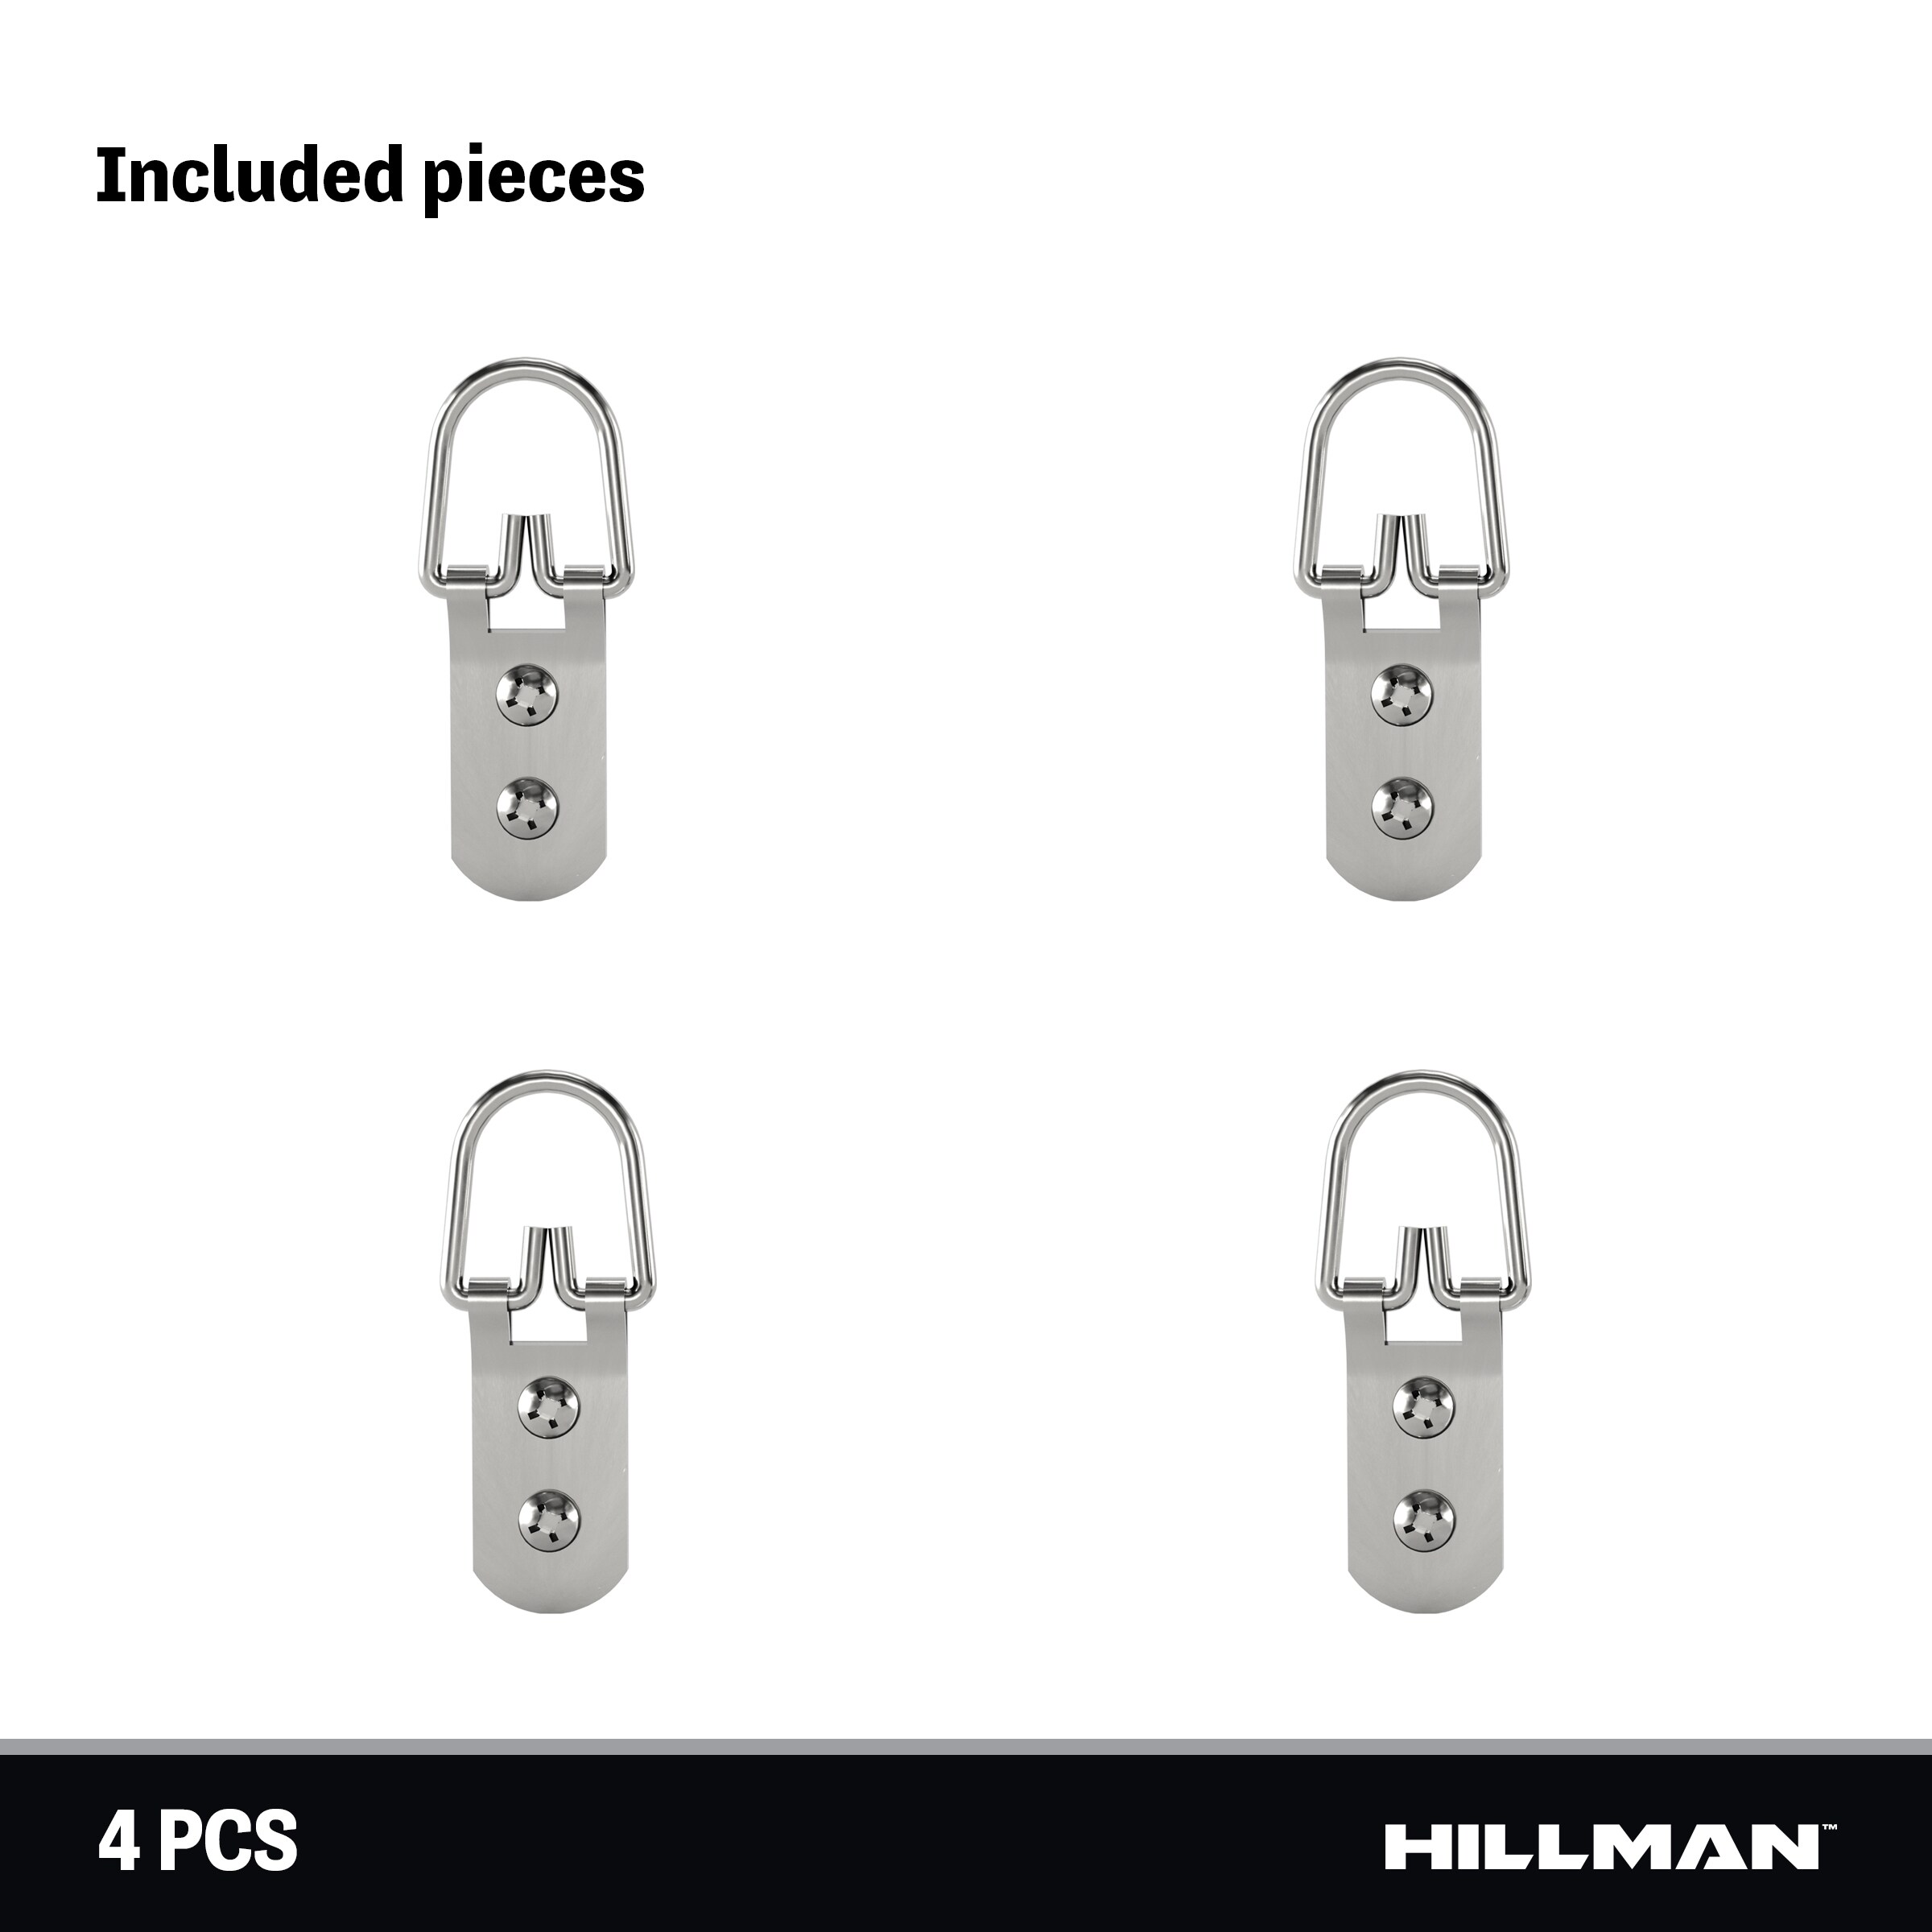 Details about   Hillman D-Ring Hangers Package of 4 Large Size #122318   NEW 